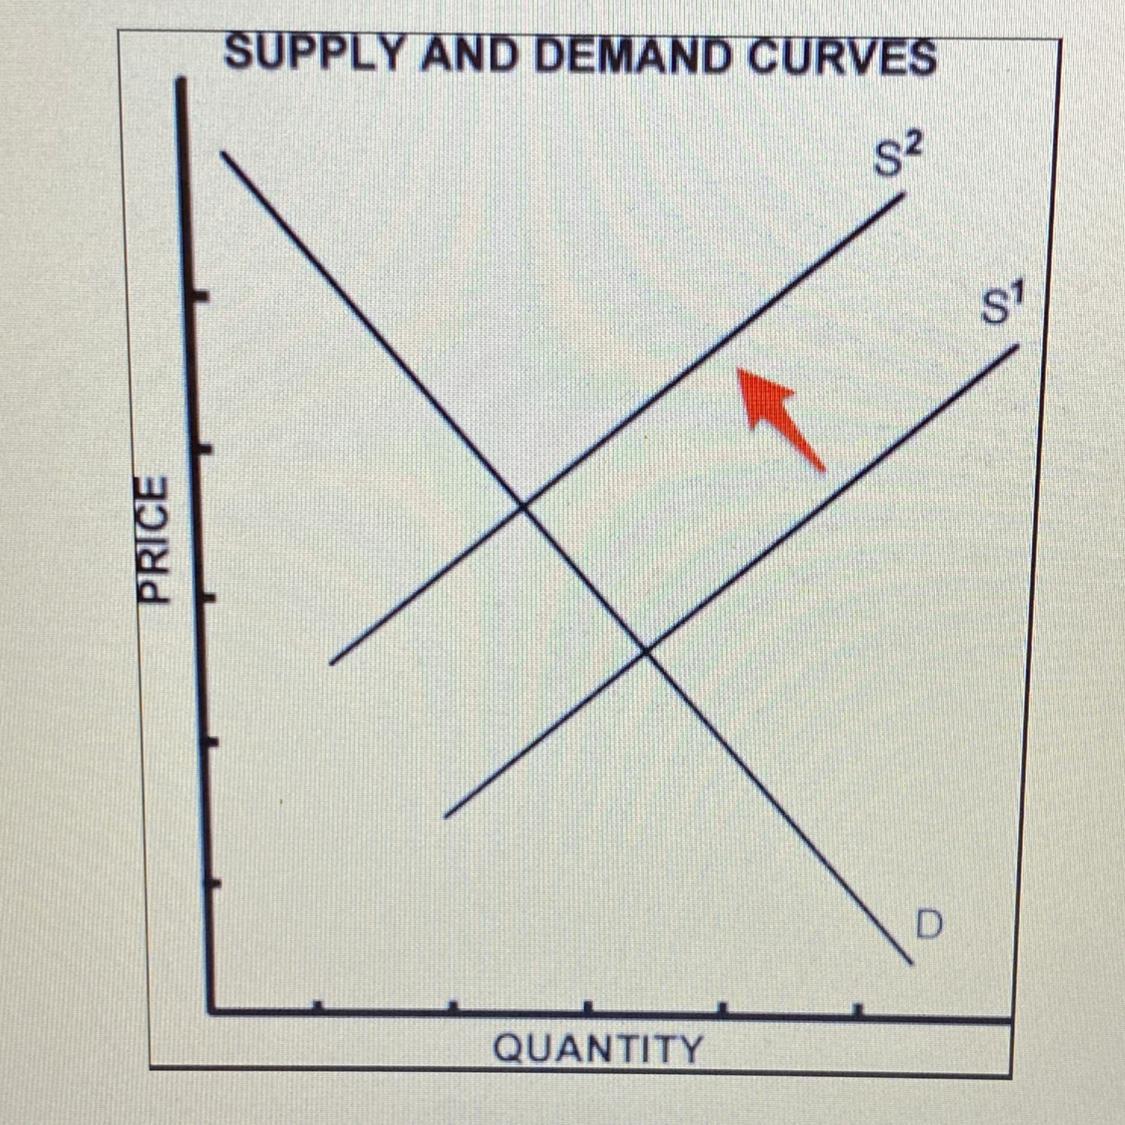 In The Graph, What Information Is Determined By Looking At The Intersection Of The Supply And Demand